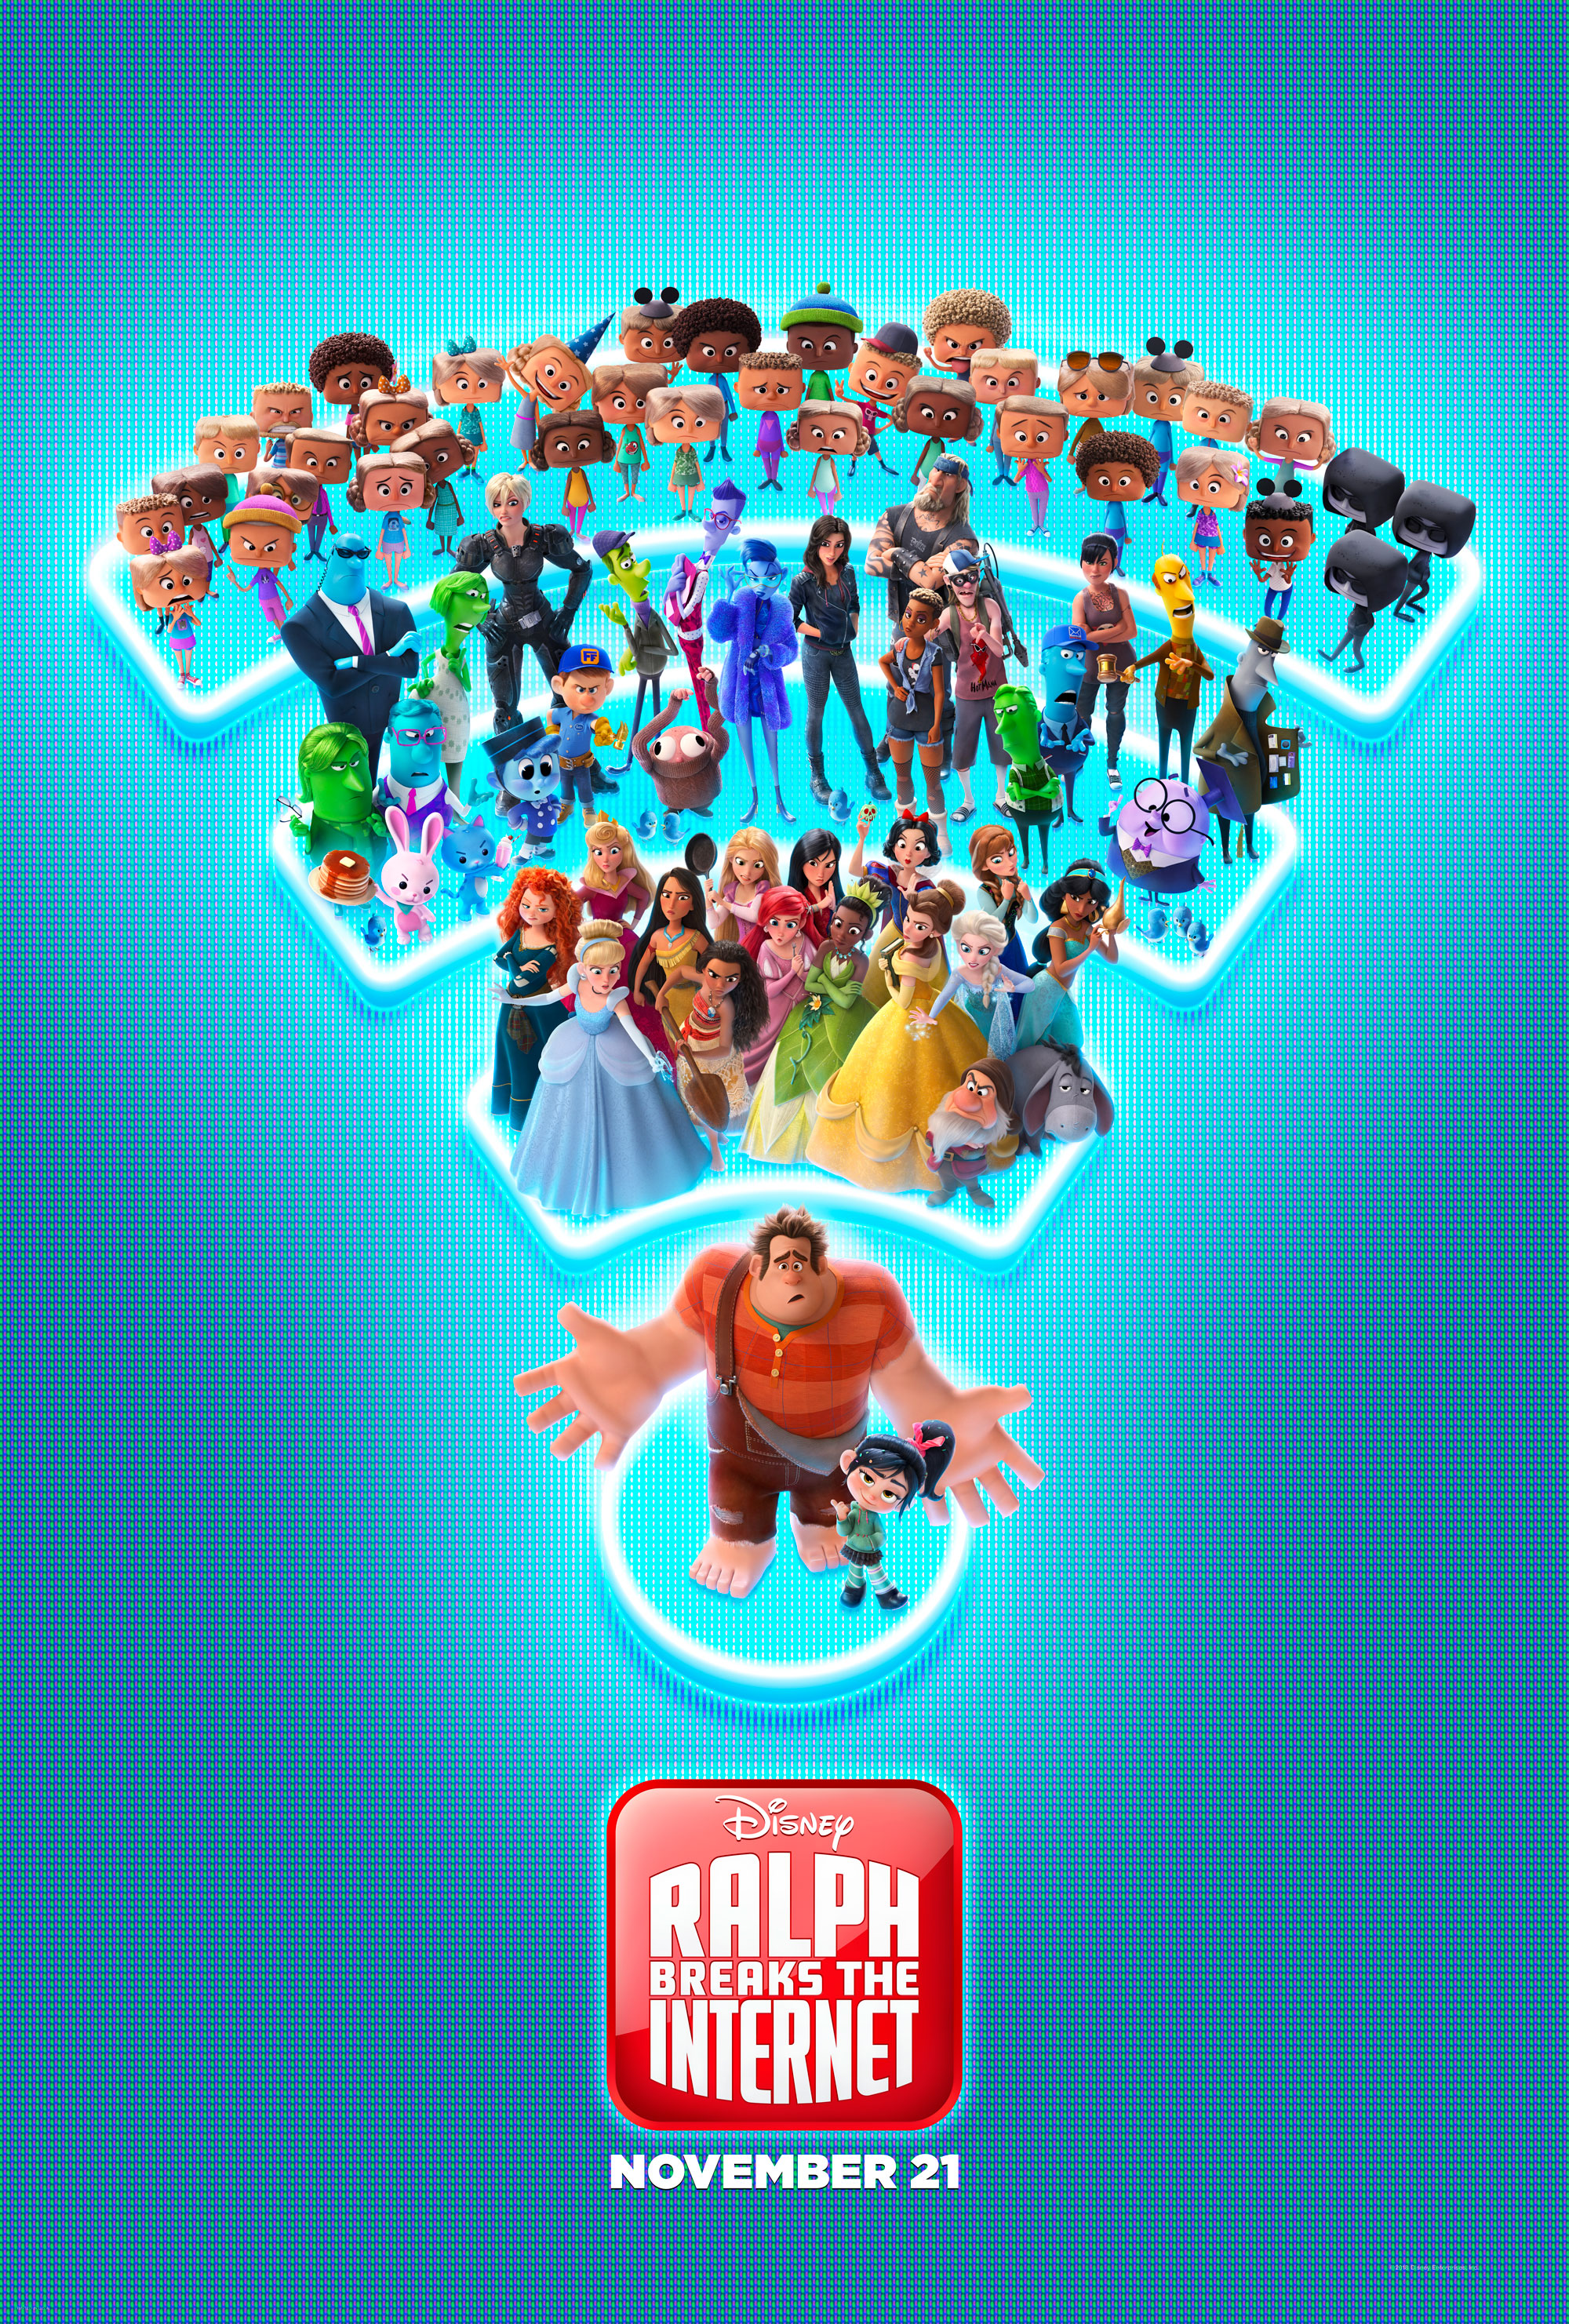 Celebrate #InternetDay with an All-New Clip from “Ralph Breaks the Internet” coming to Theaters November 21